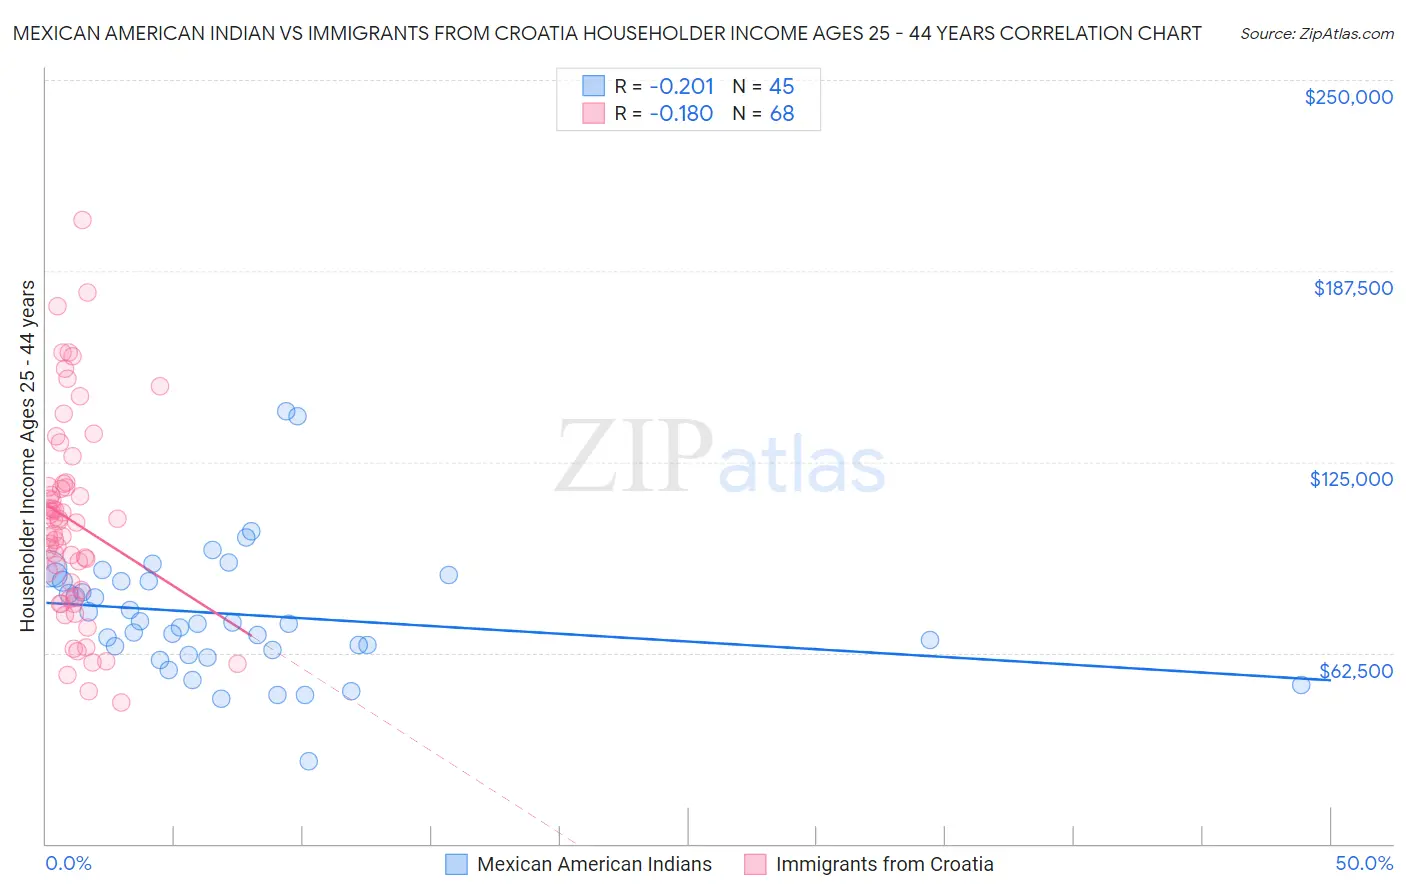 Mexican American Indian vs Immigrants from Croatia Householder Income Ages 25 - 44 years